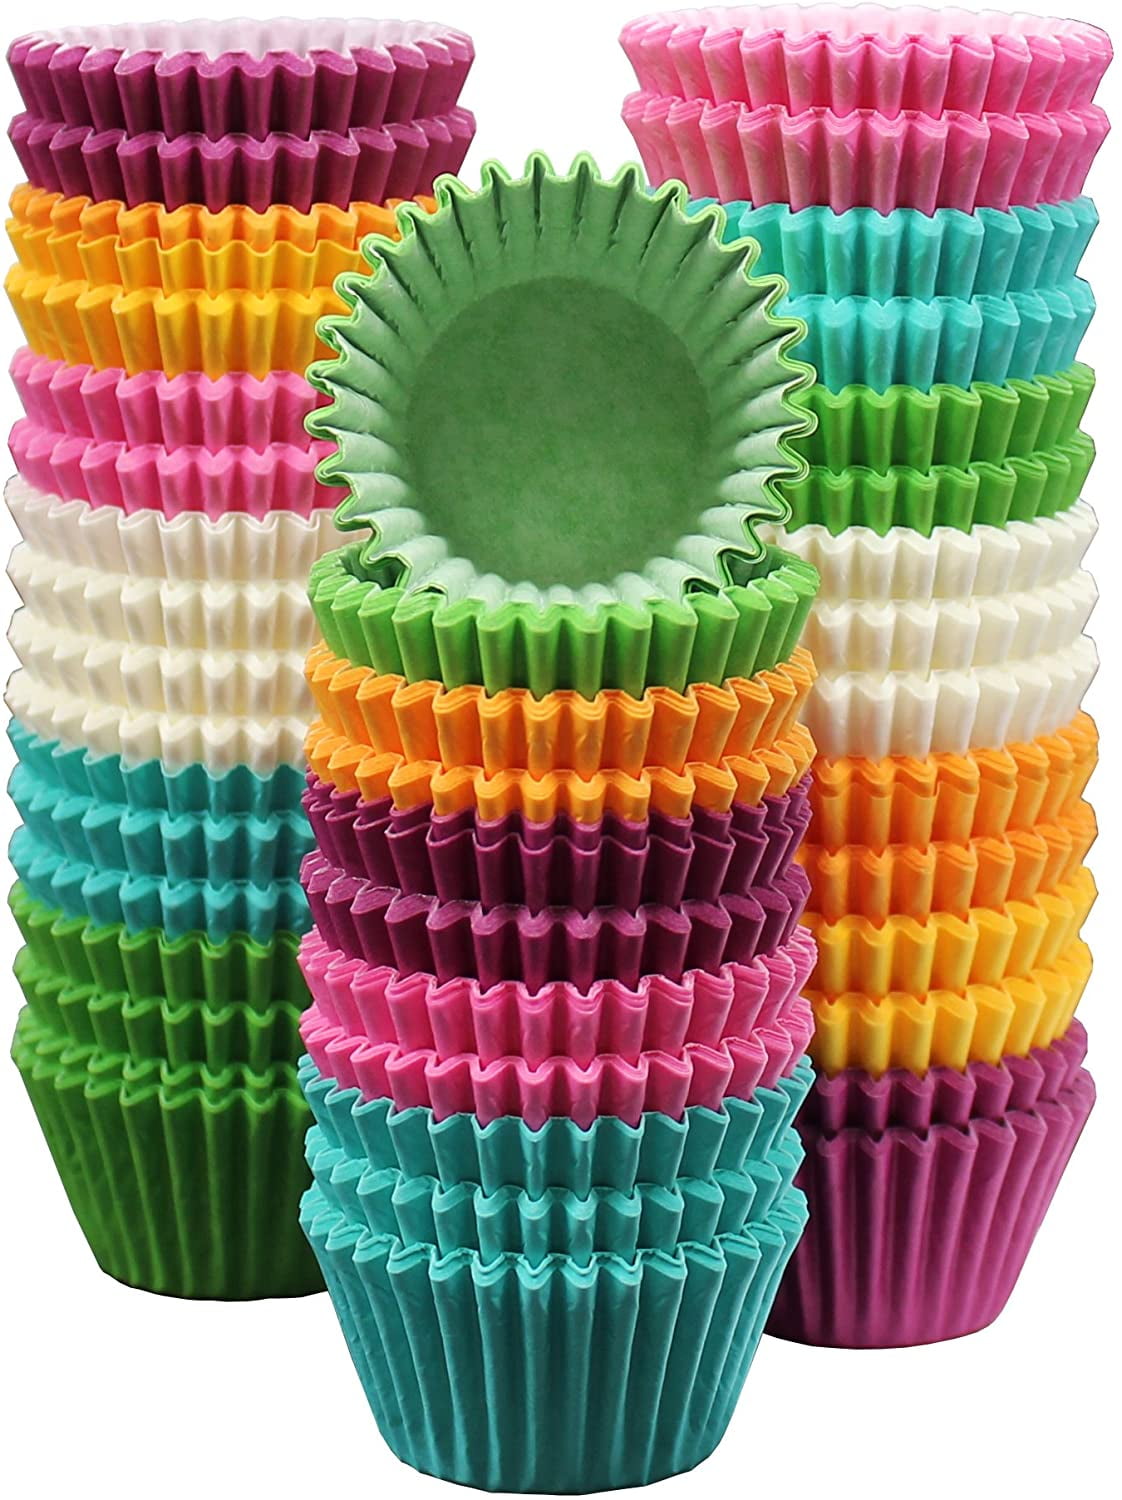 RAYNAG 50 Pieces Paper Muffin Cake Baking Cups Square Cupcake Liners Holder Cases